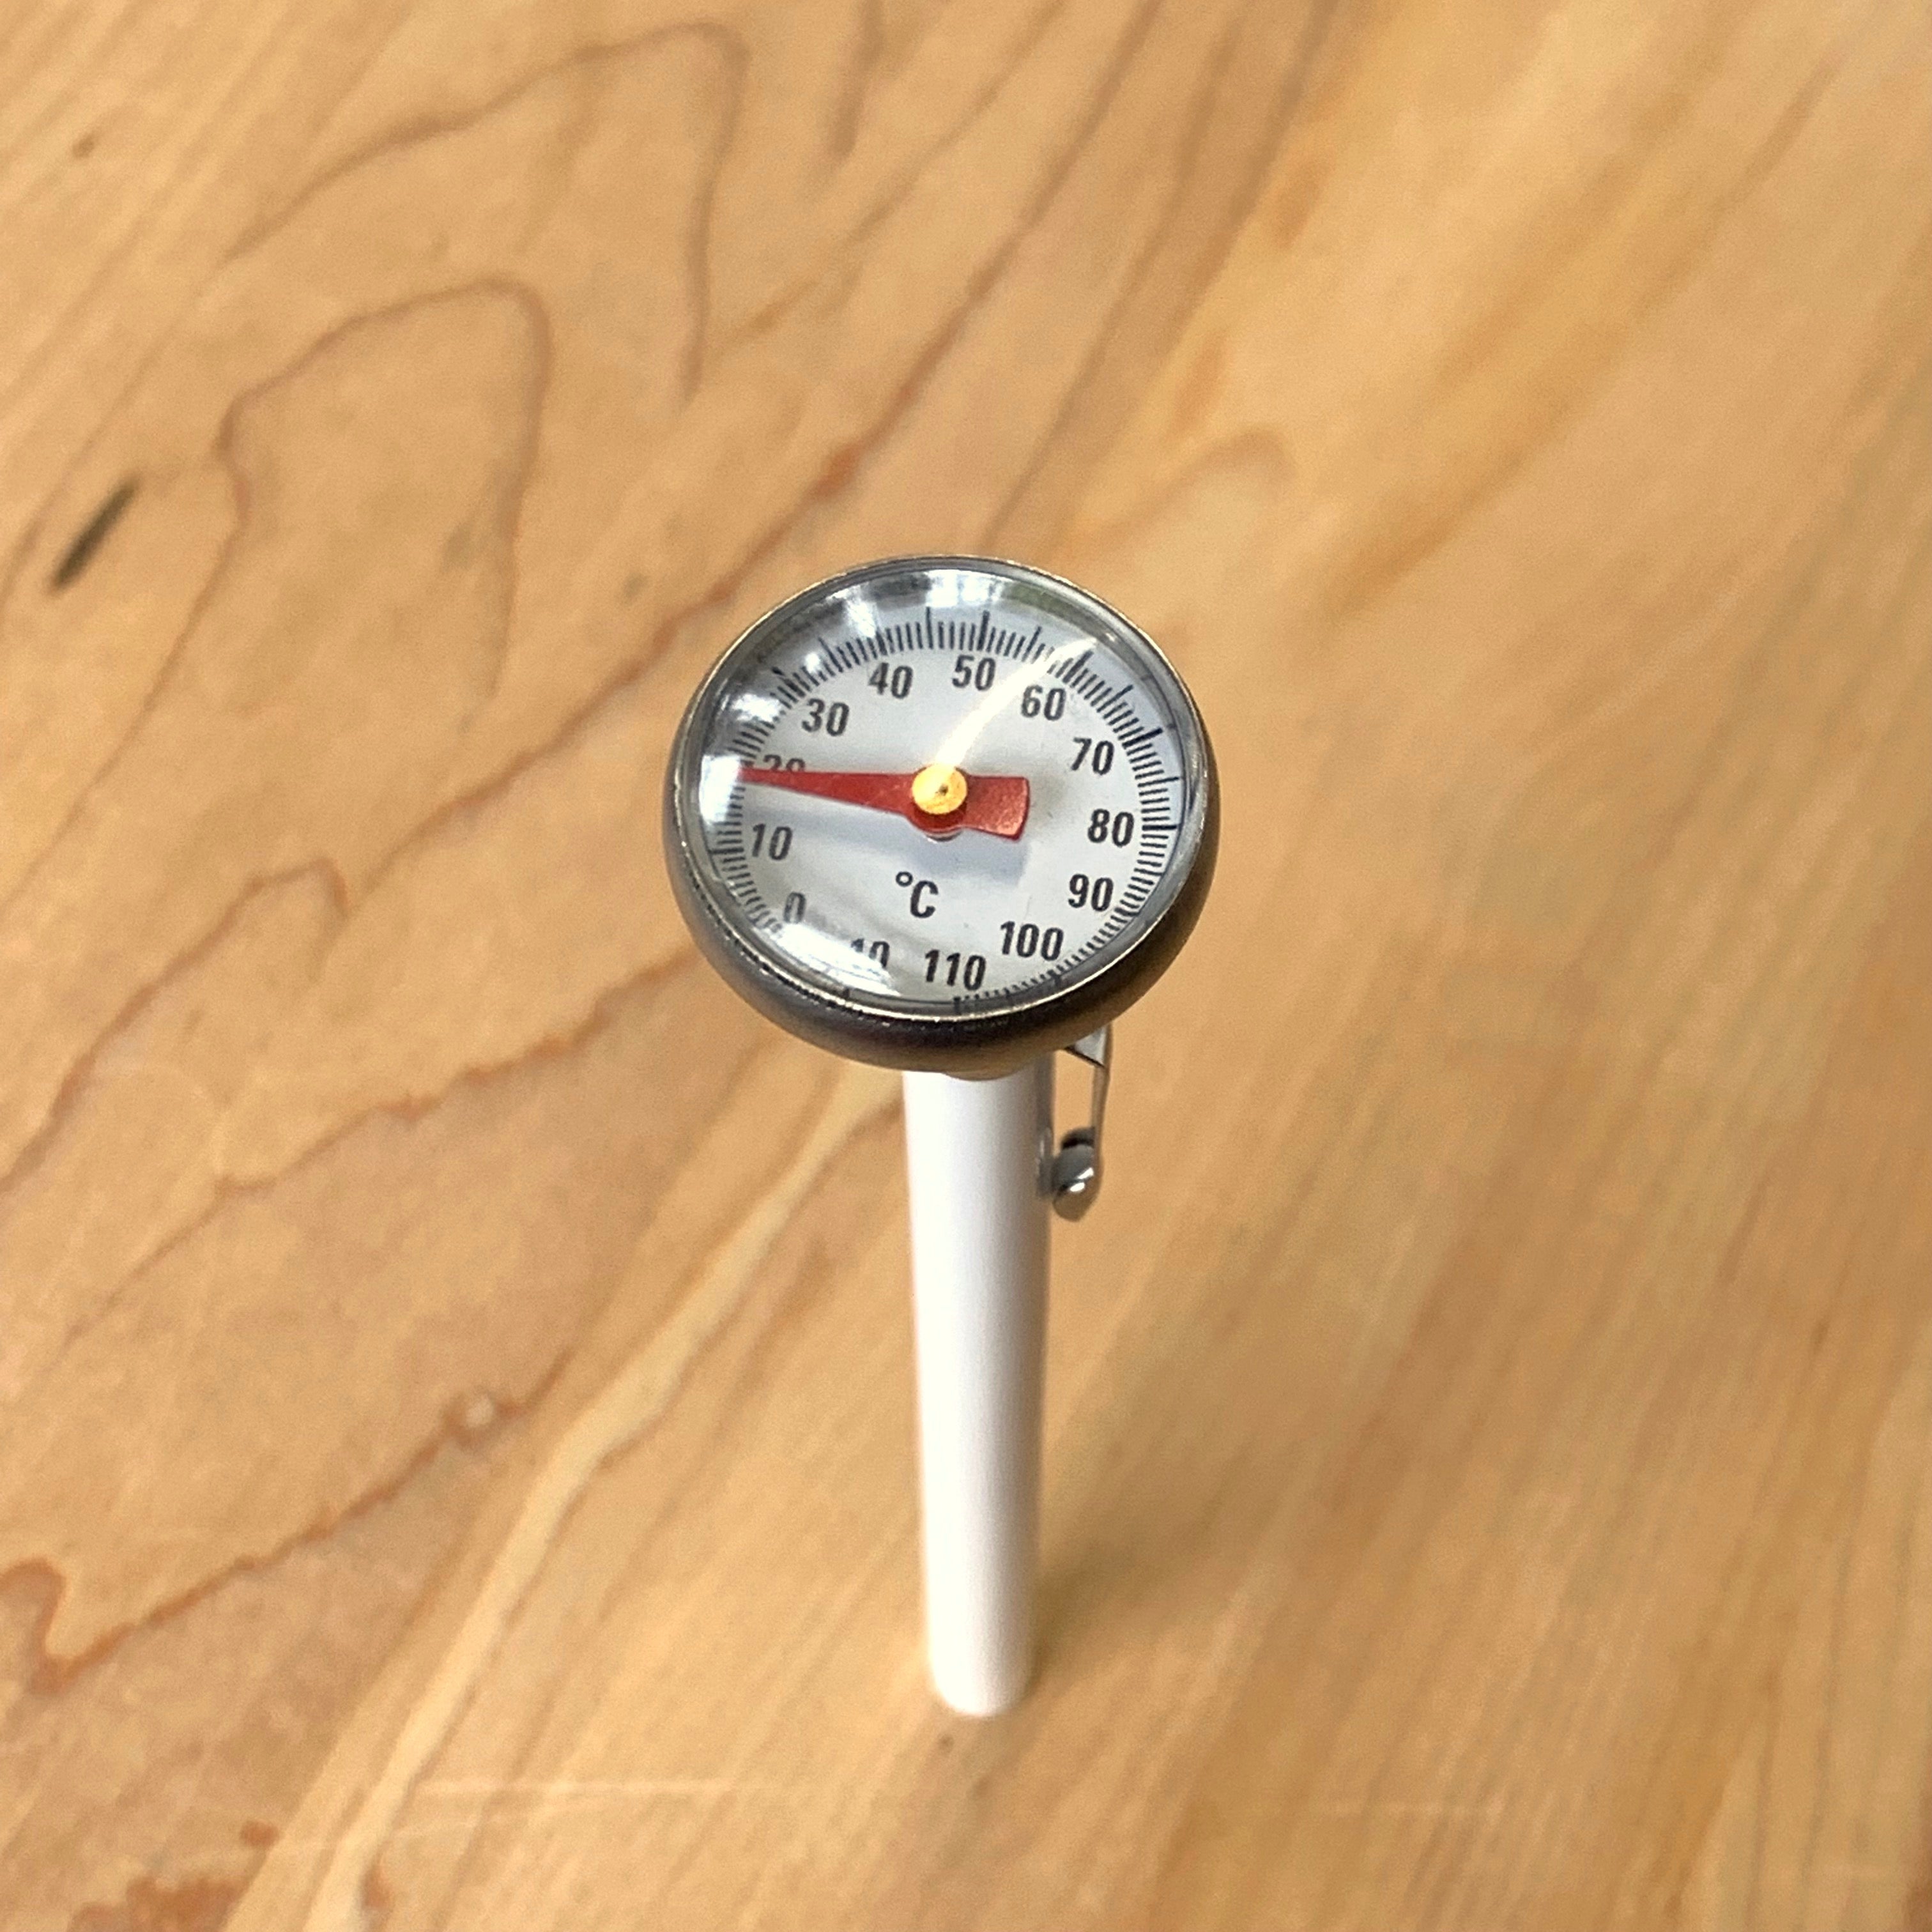 Mechanical thermometer